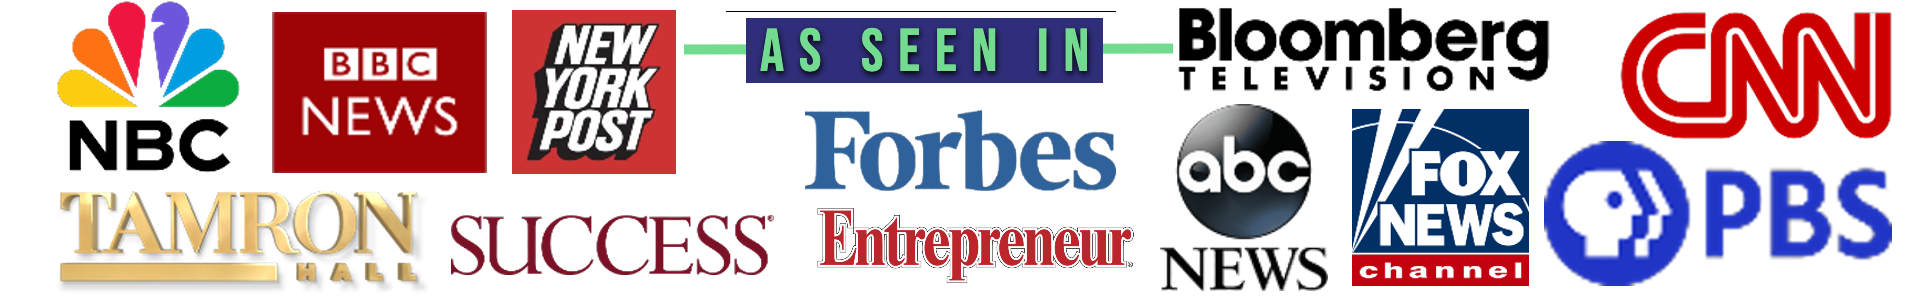 Chris Westfall has appeared on CNN, ABC NEWS, FOX News and in multiple publications like Forbes, Entrepreneur and SUCCESS magazine